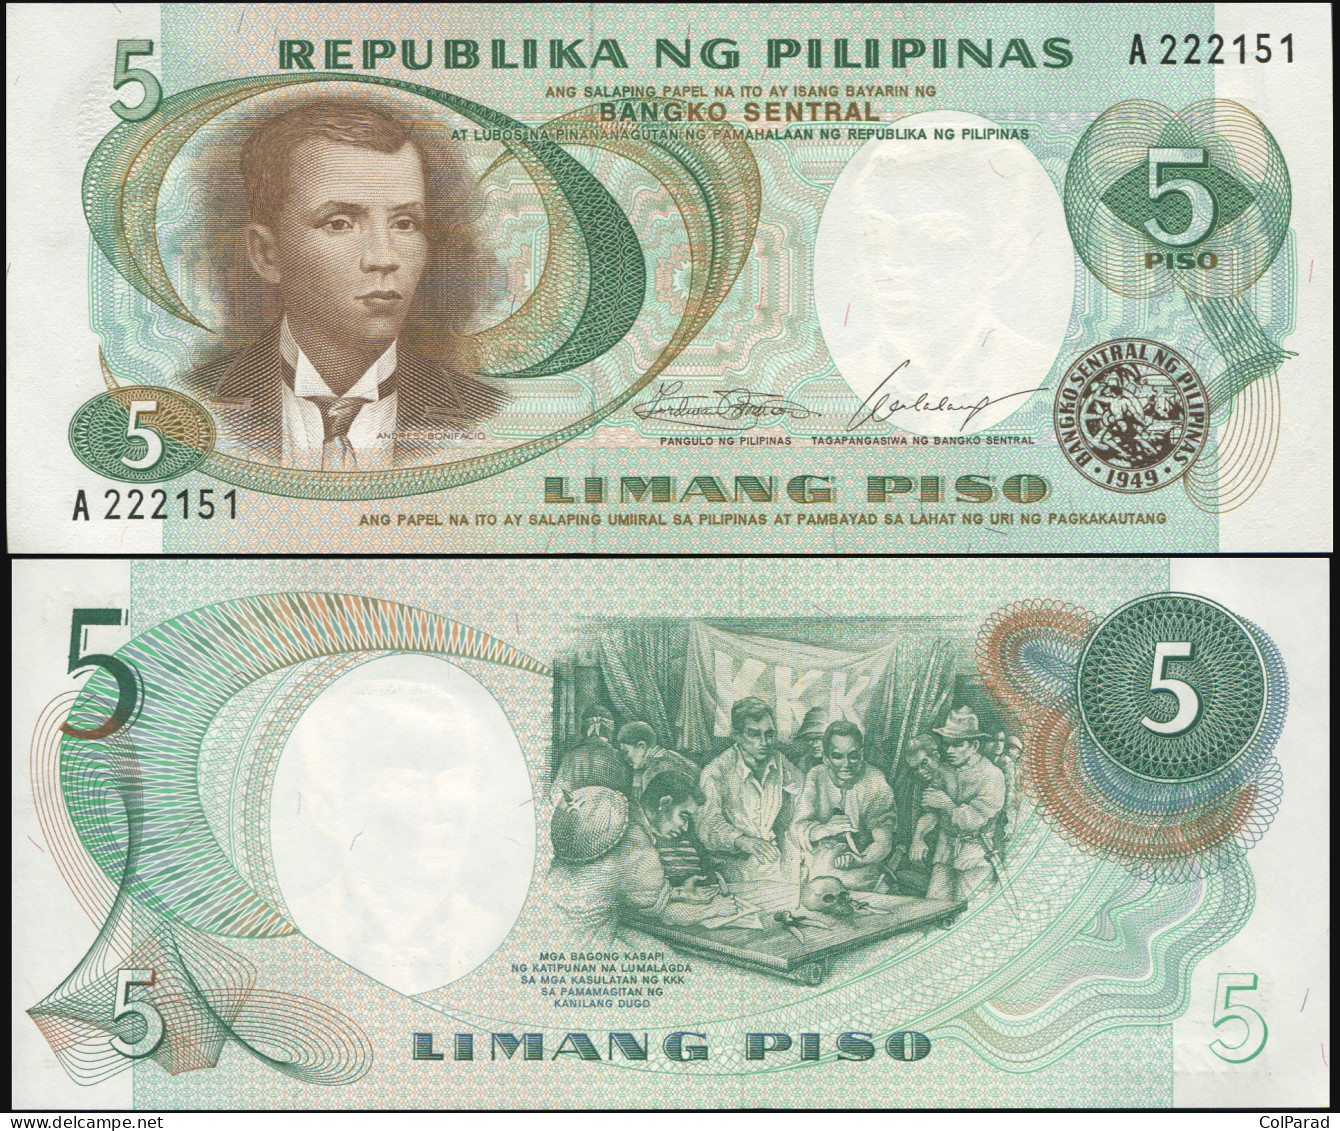 PHILIPPINES 5 PISO - ND (1969) - Paper Unc - P.143a Banknote - Philippines